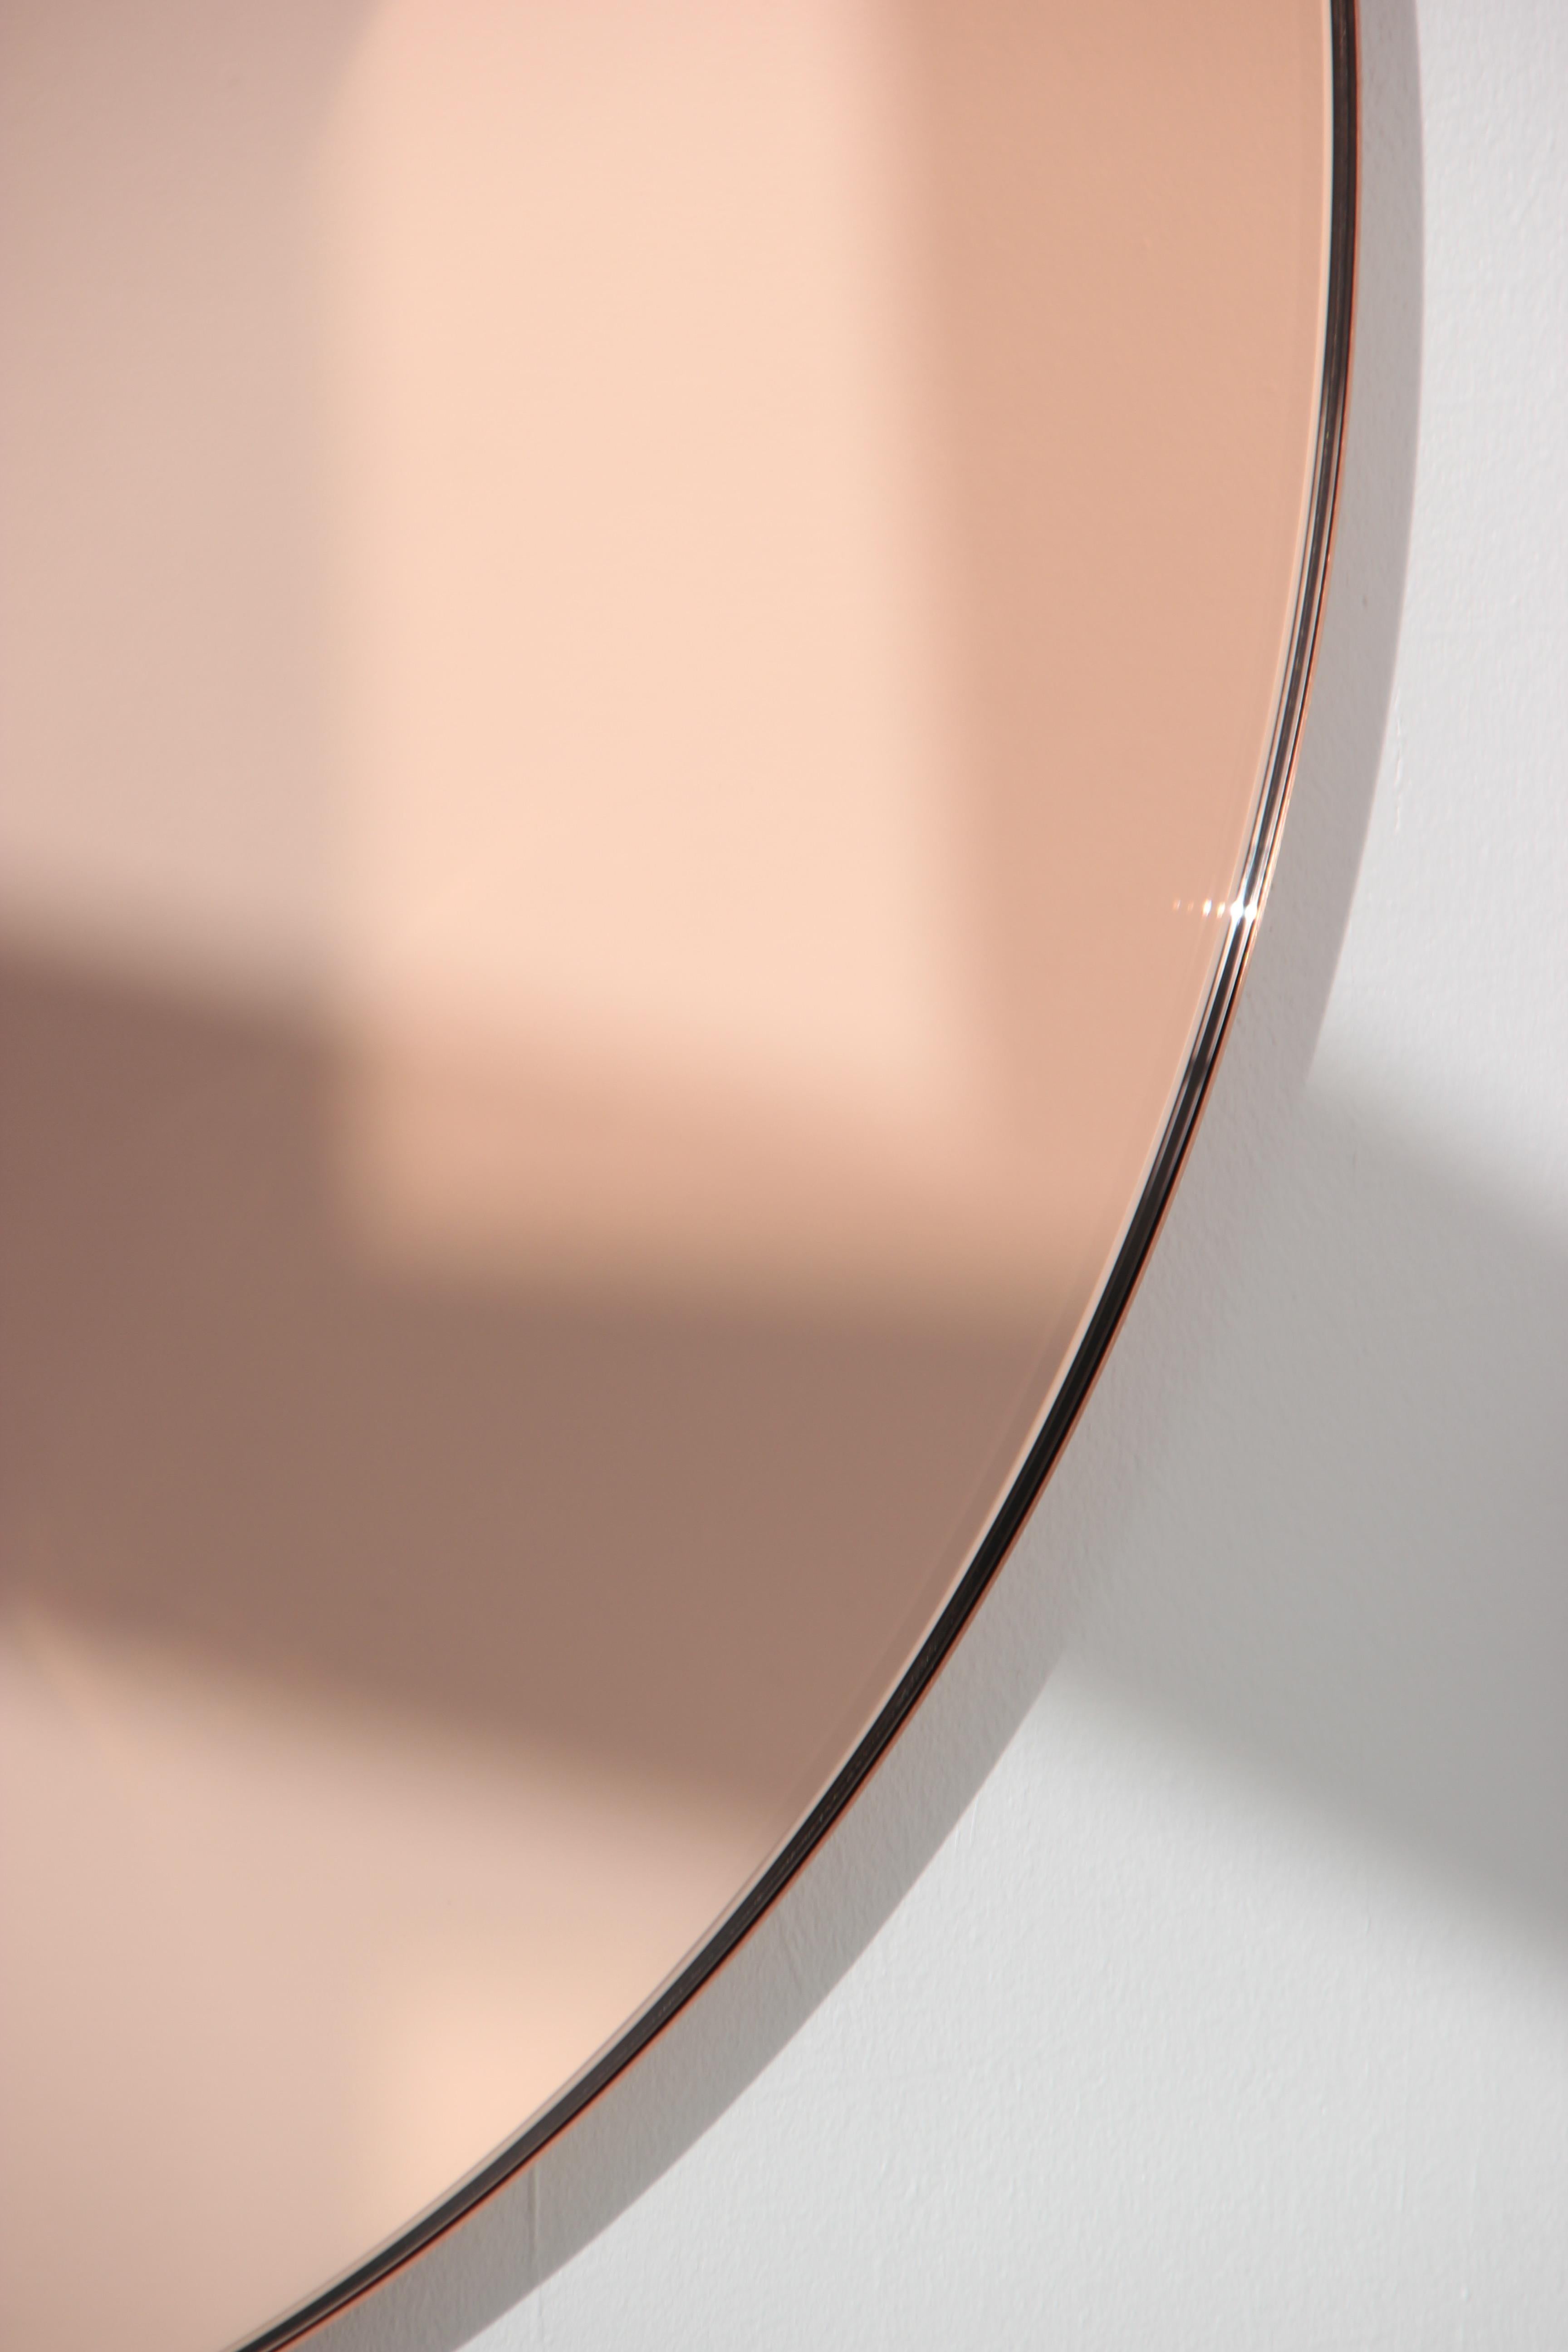 Brushed Orbis Rose Gold Tinted Round Minimalist Mirror with Copper Frame, Small For Sale